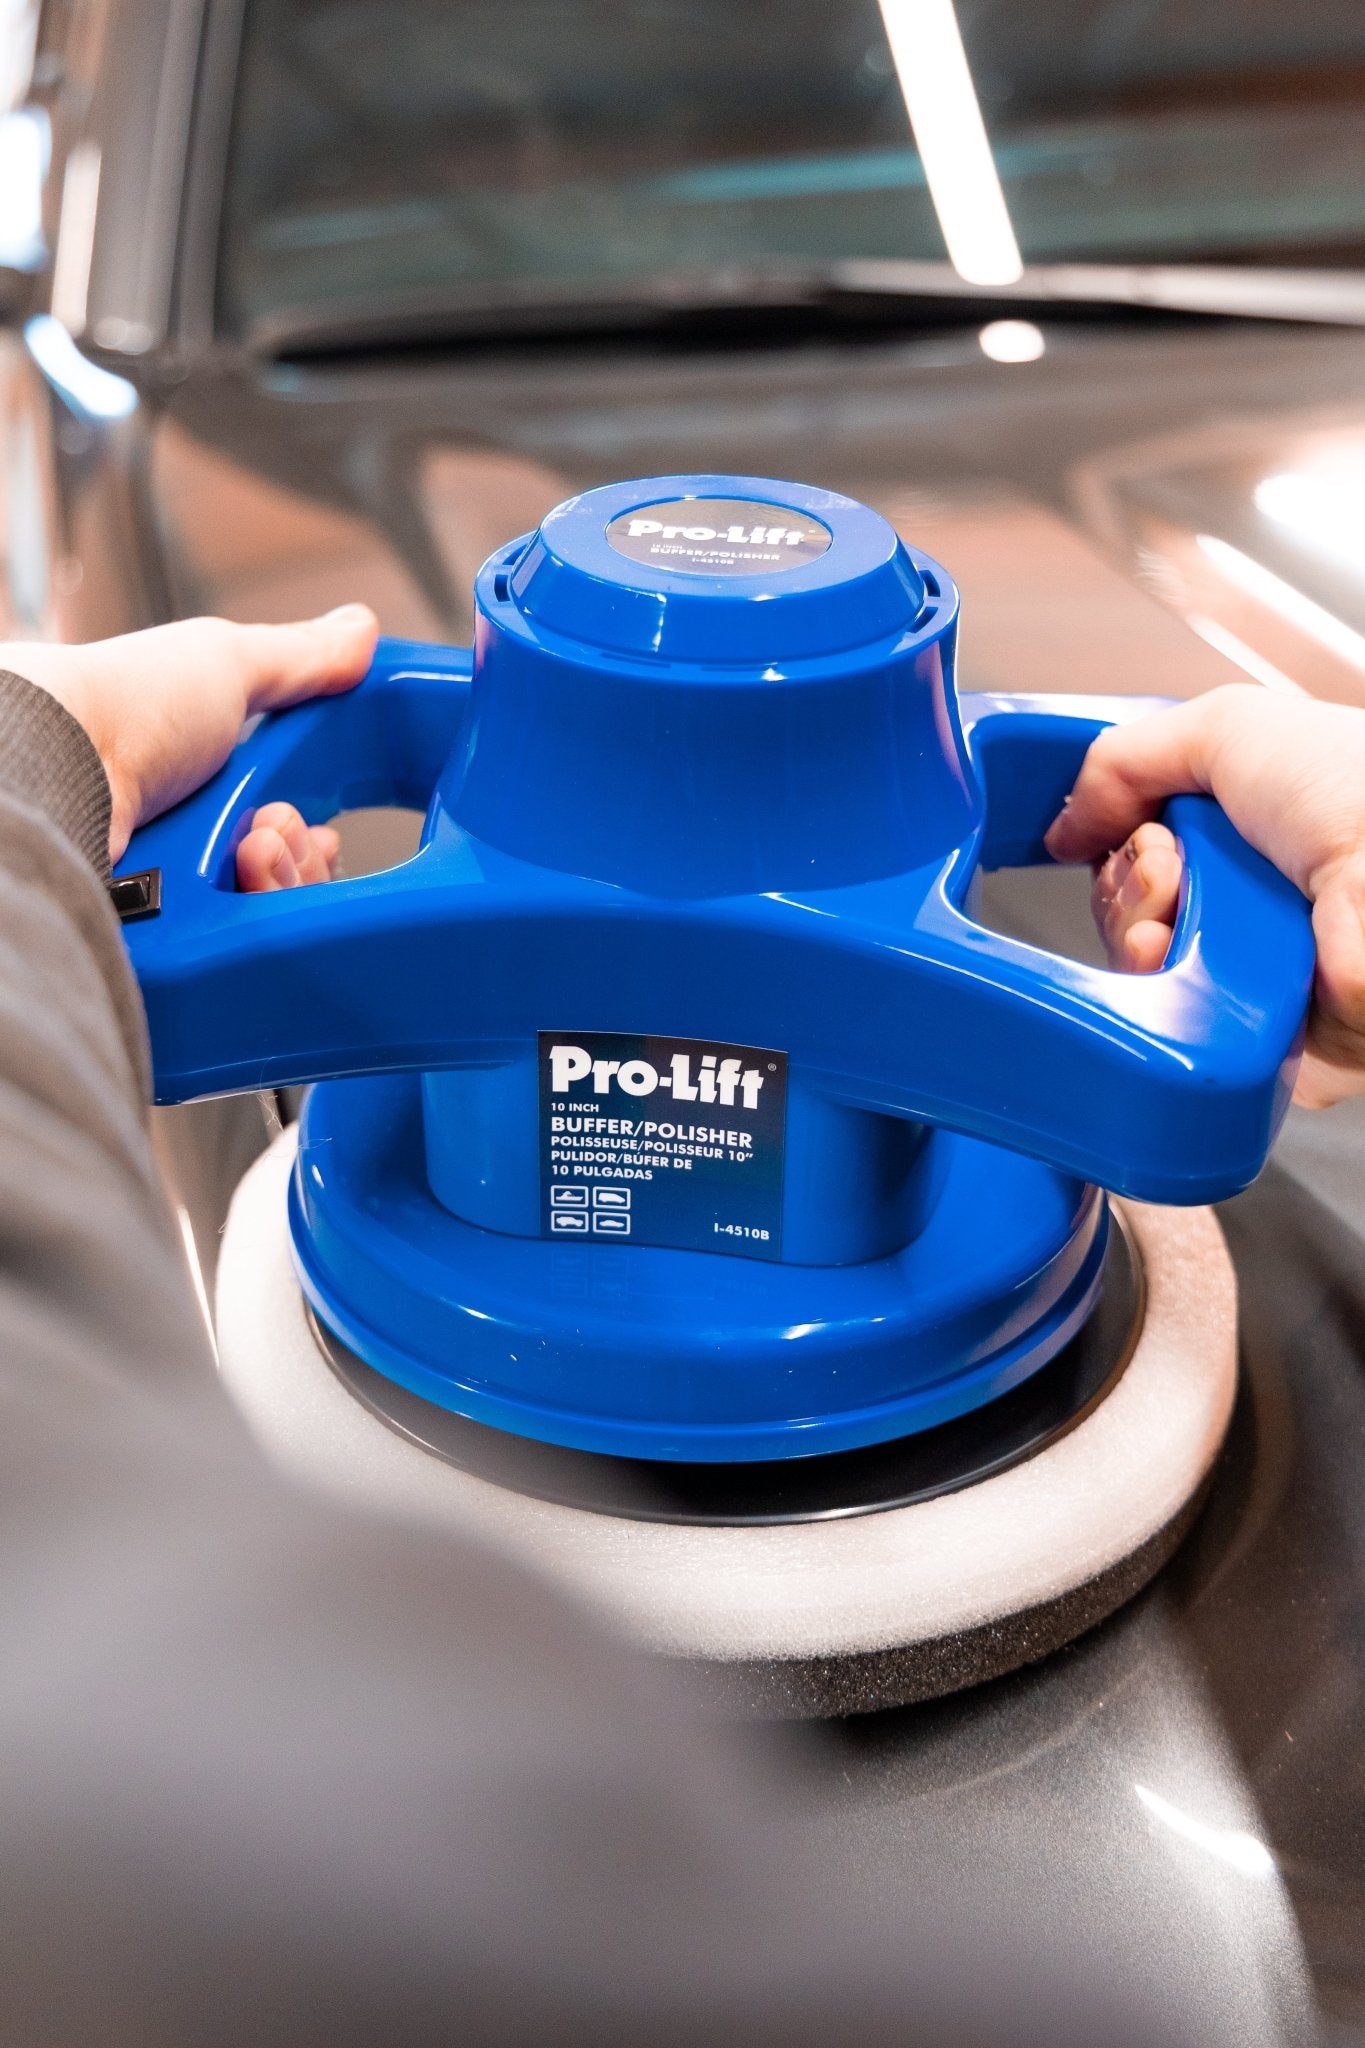 Pro-Lift 10-Inch Buffer/Polisher: High-Speed Car Detailing Made Easy